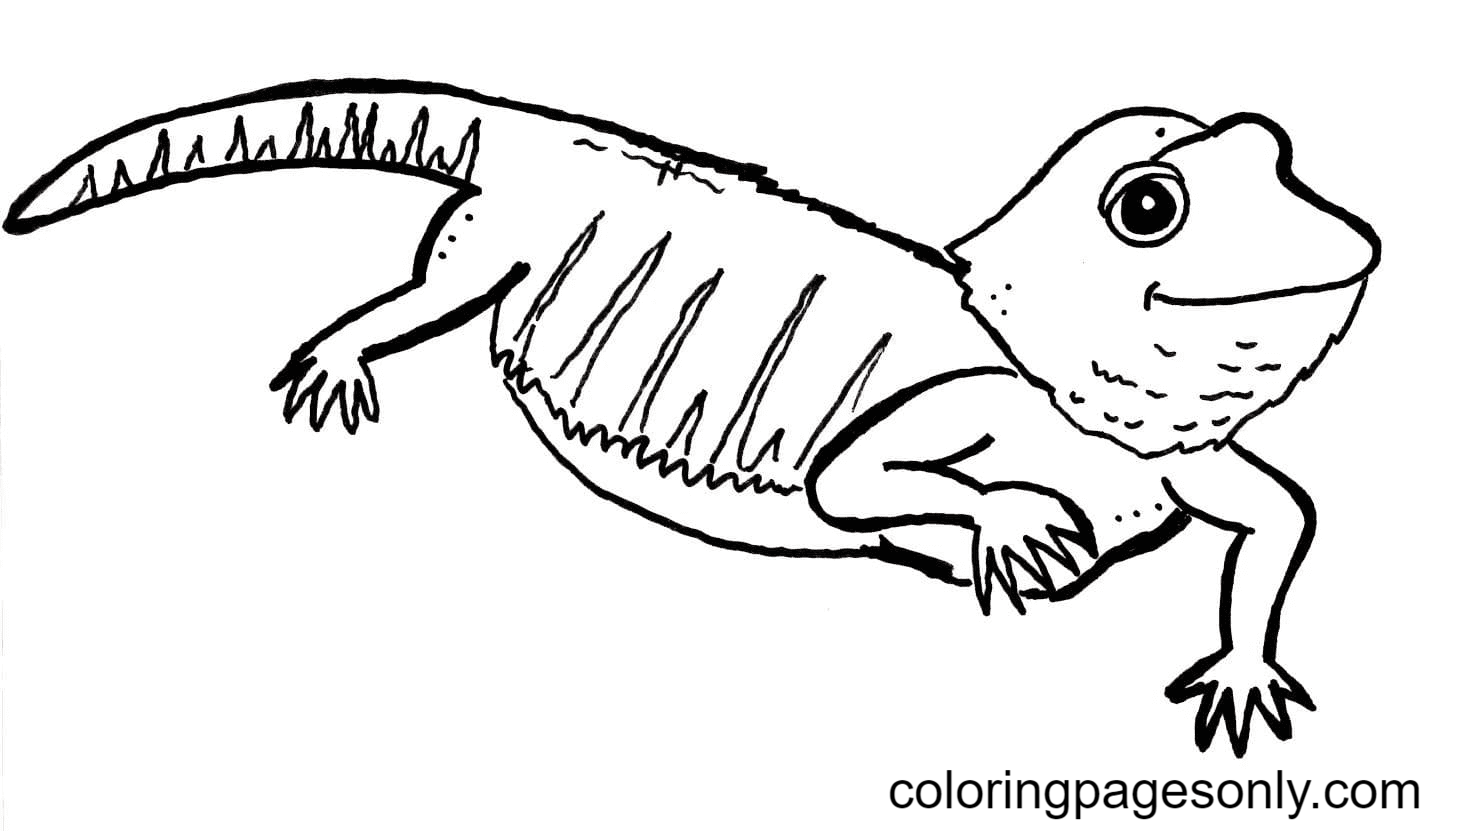 Smiling Lizard Coloring Pages